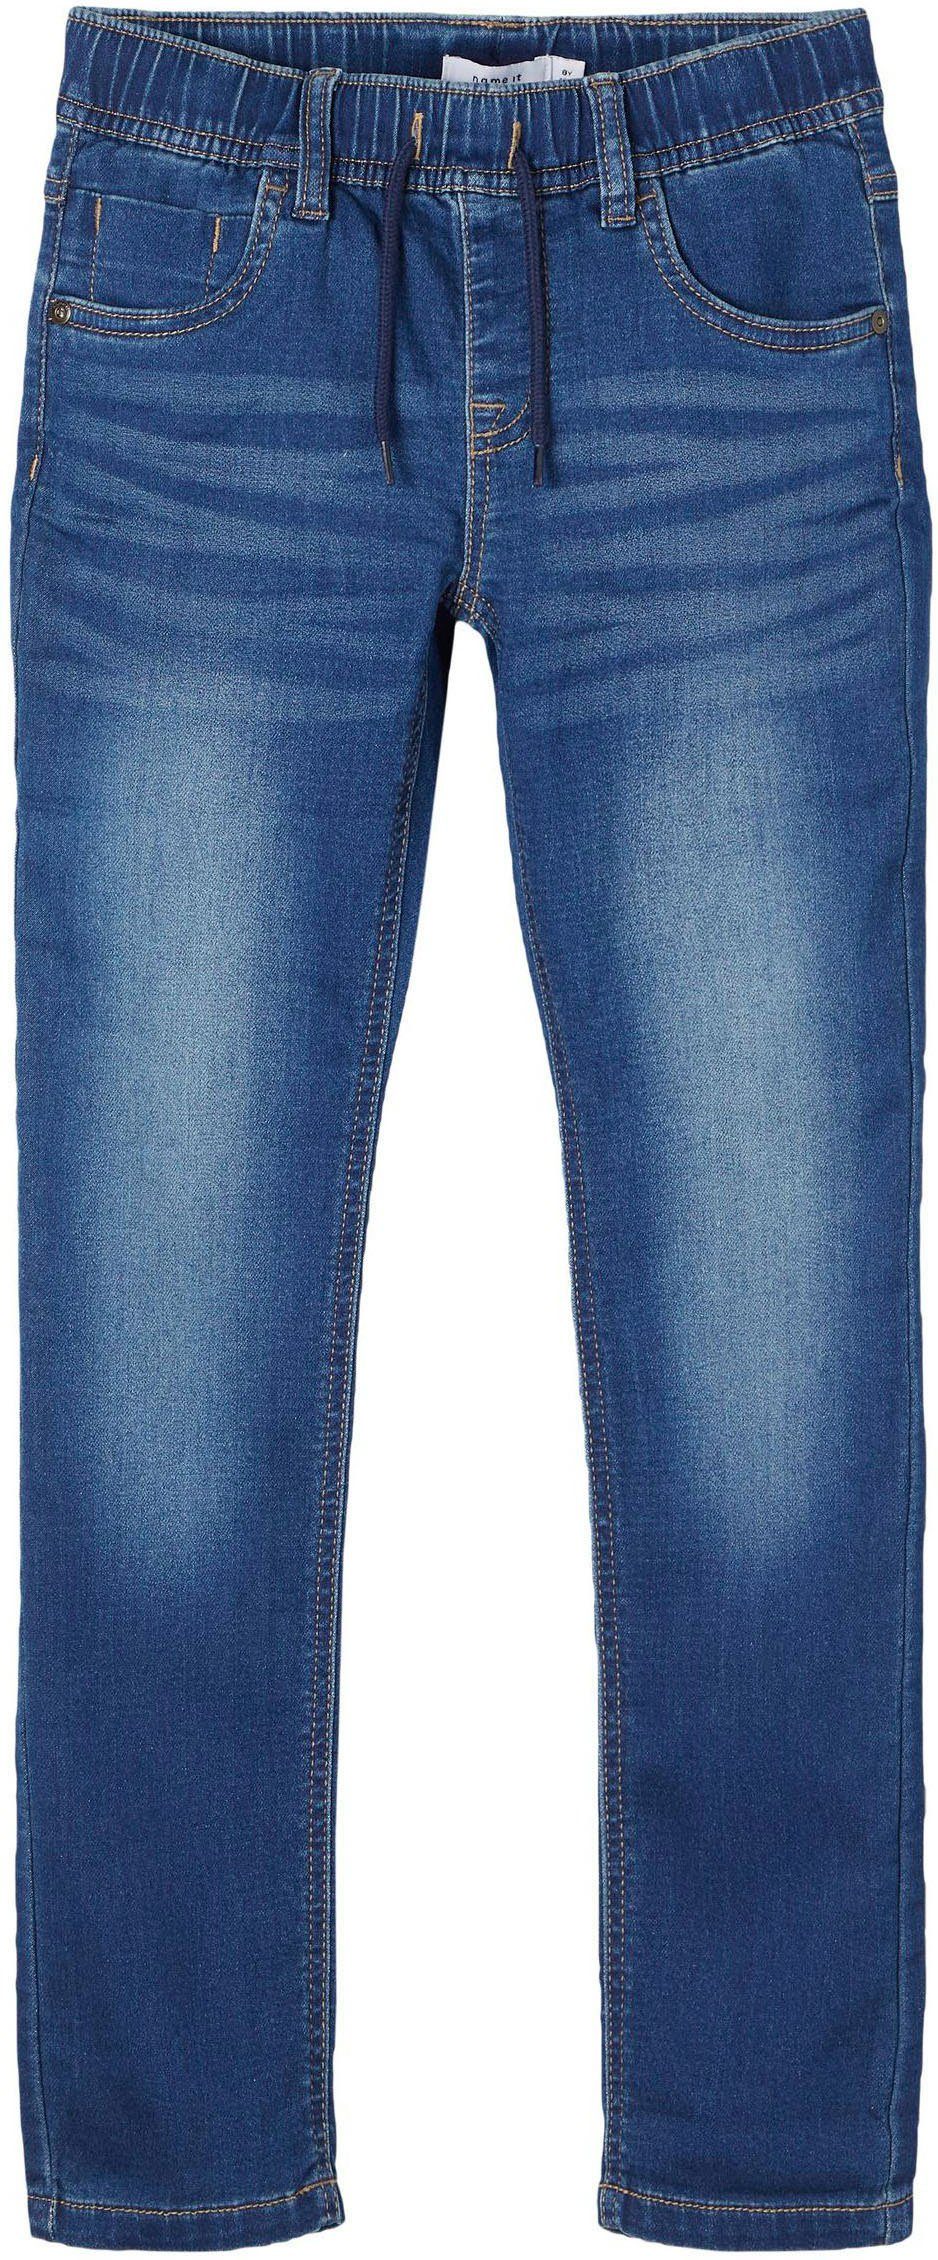 It 3454 NKMROBIN Stretch-Jeans Name DNMTHAYERS